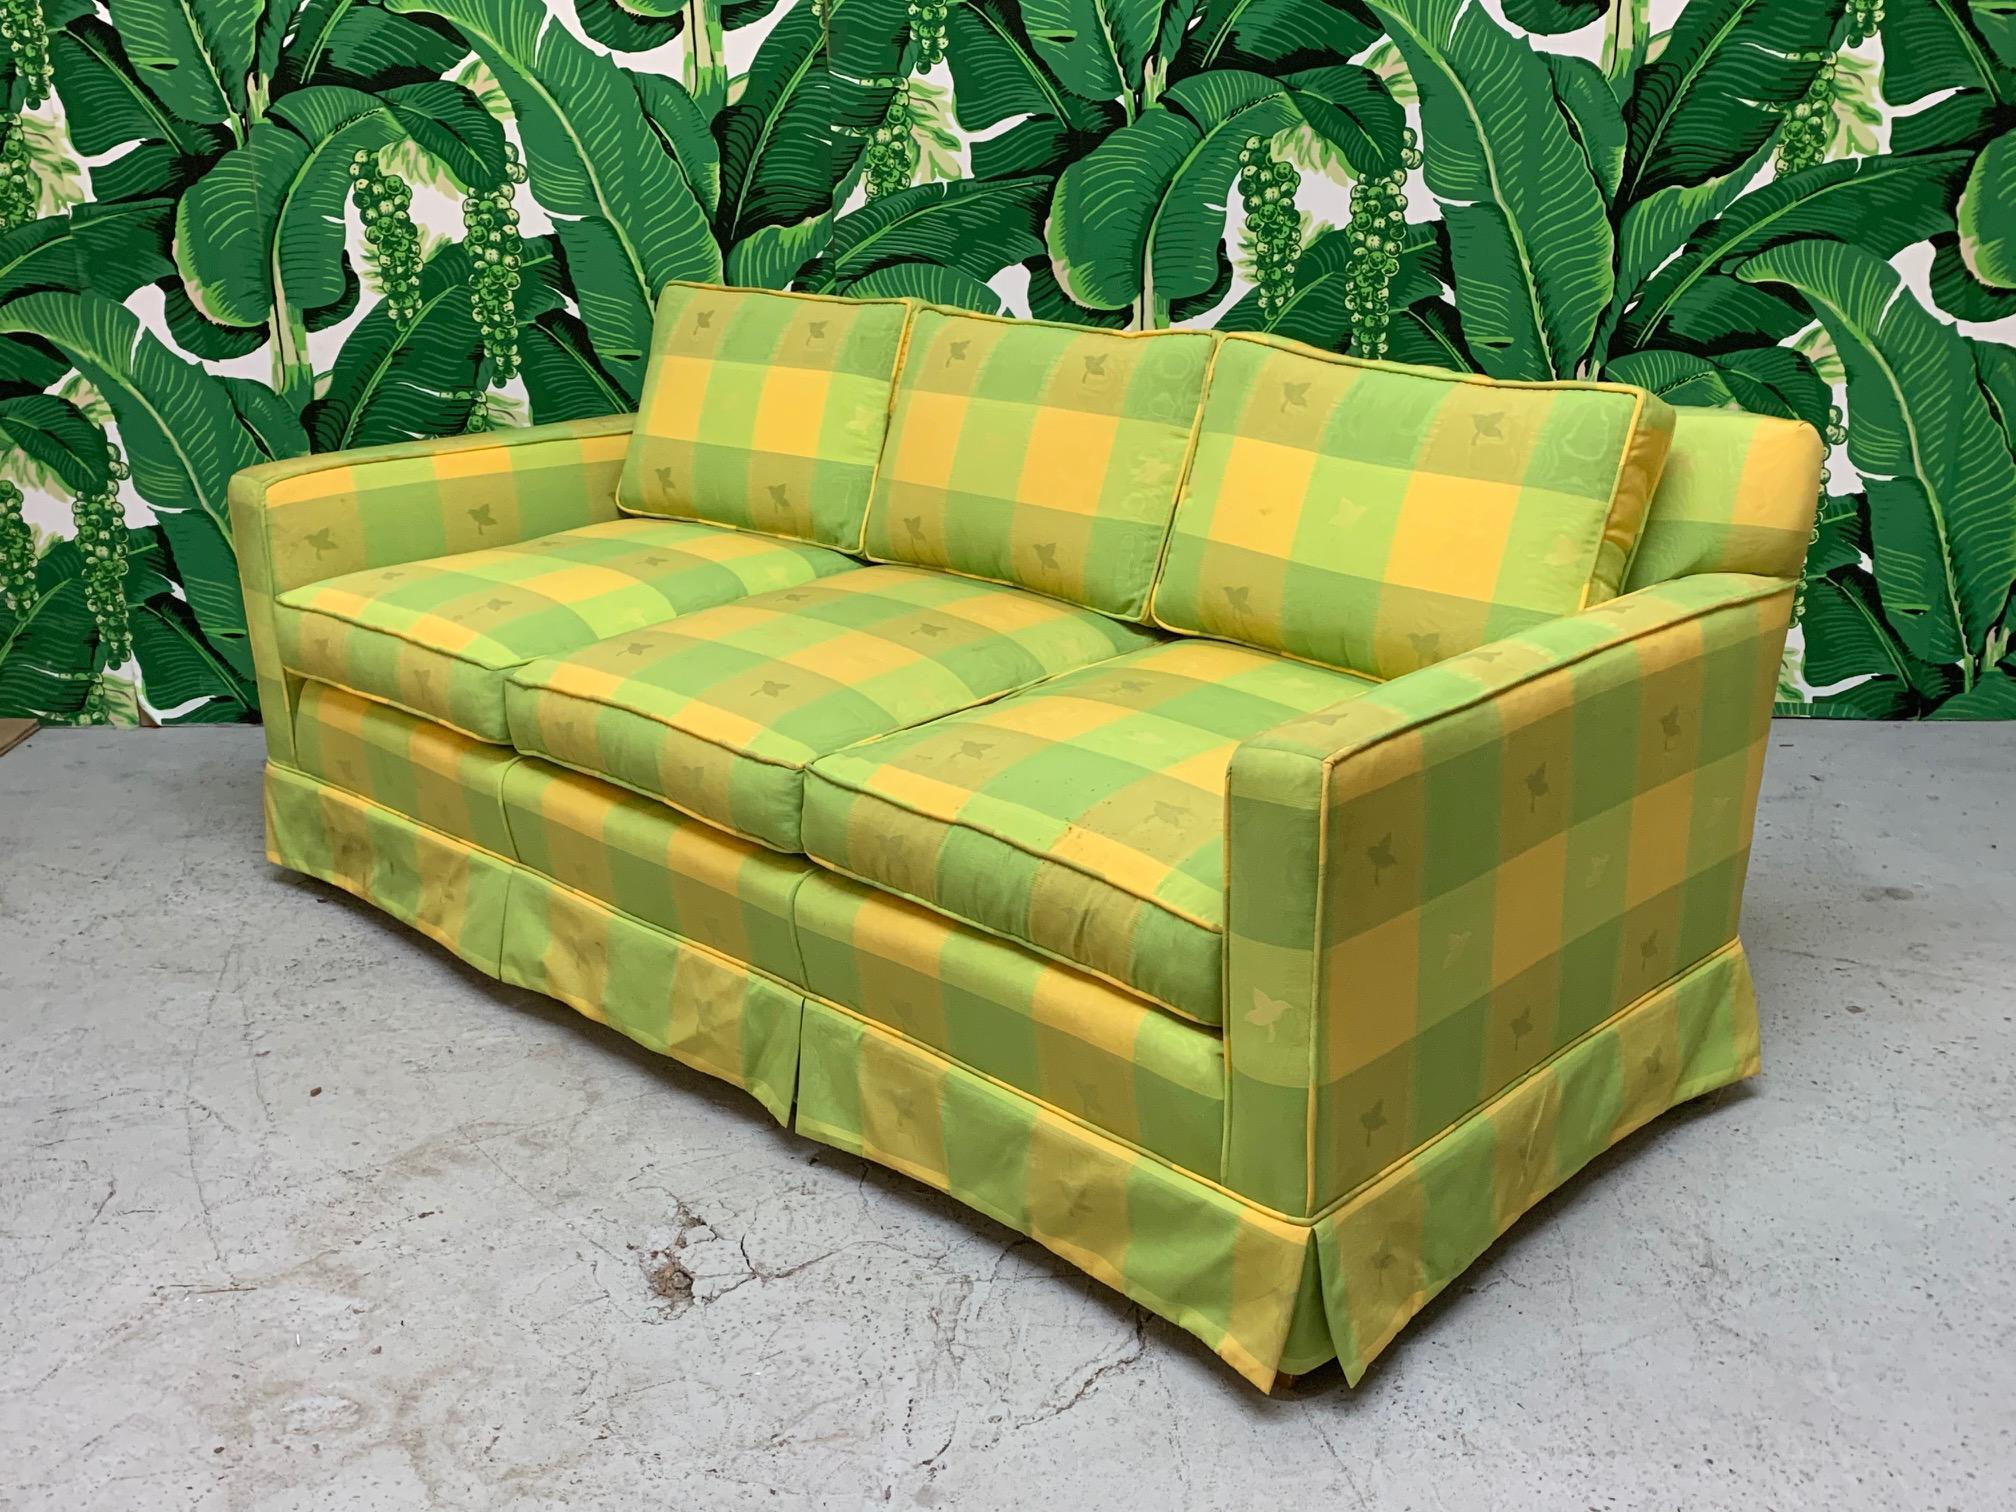 Vintage green and yellow plaid sofa in the manner of Dorothy Draper. Cheerful and fun print that will add a bright touch to any decor. Very good condition structurally and cosmetically with no stains or tears to fabric. 
 